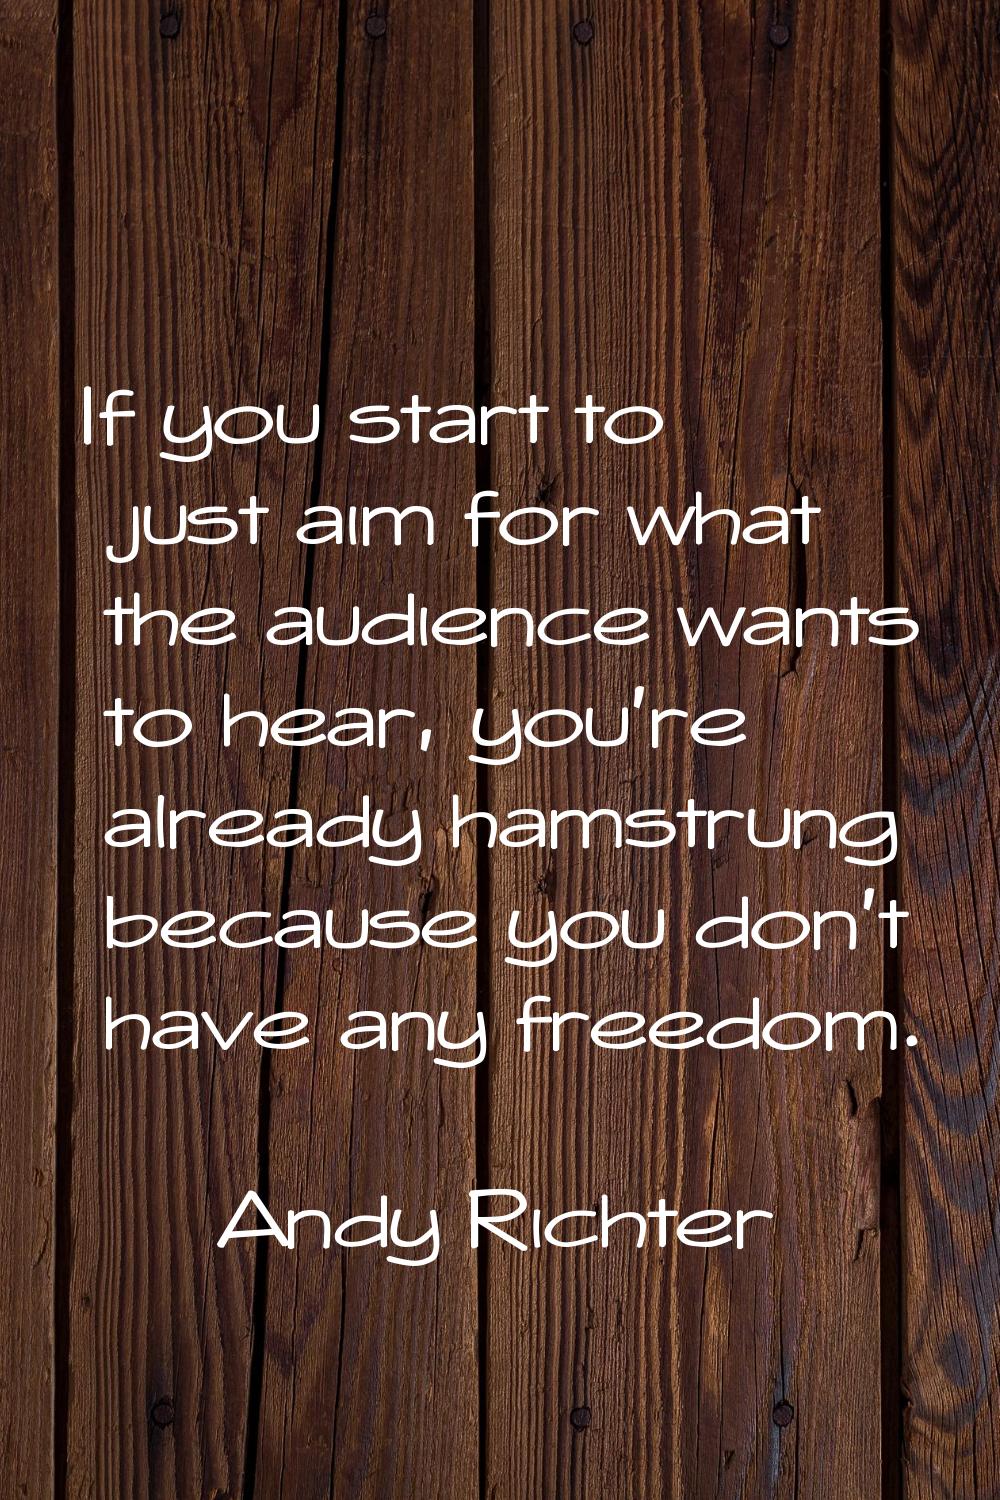 If you start to just aim for what the audience wants to hear, you're already hamstrung because you 